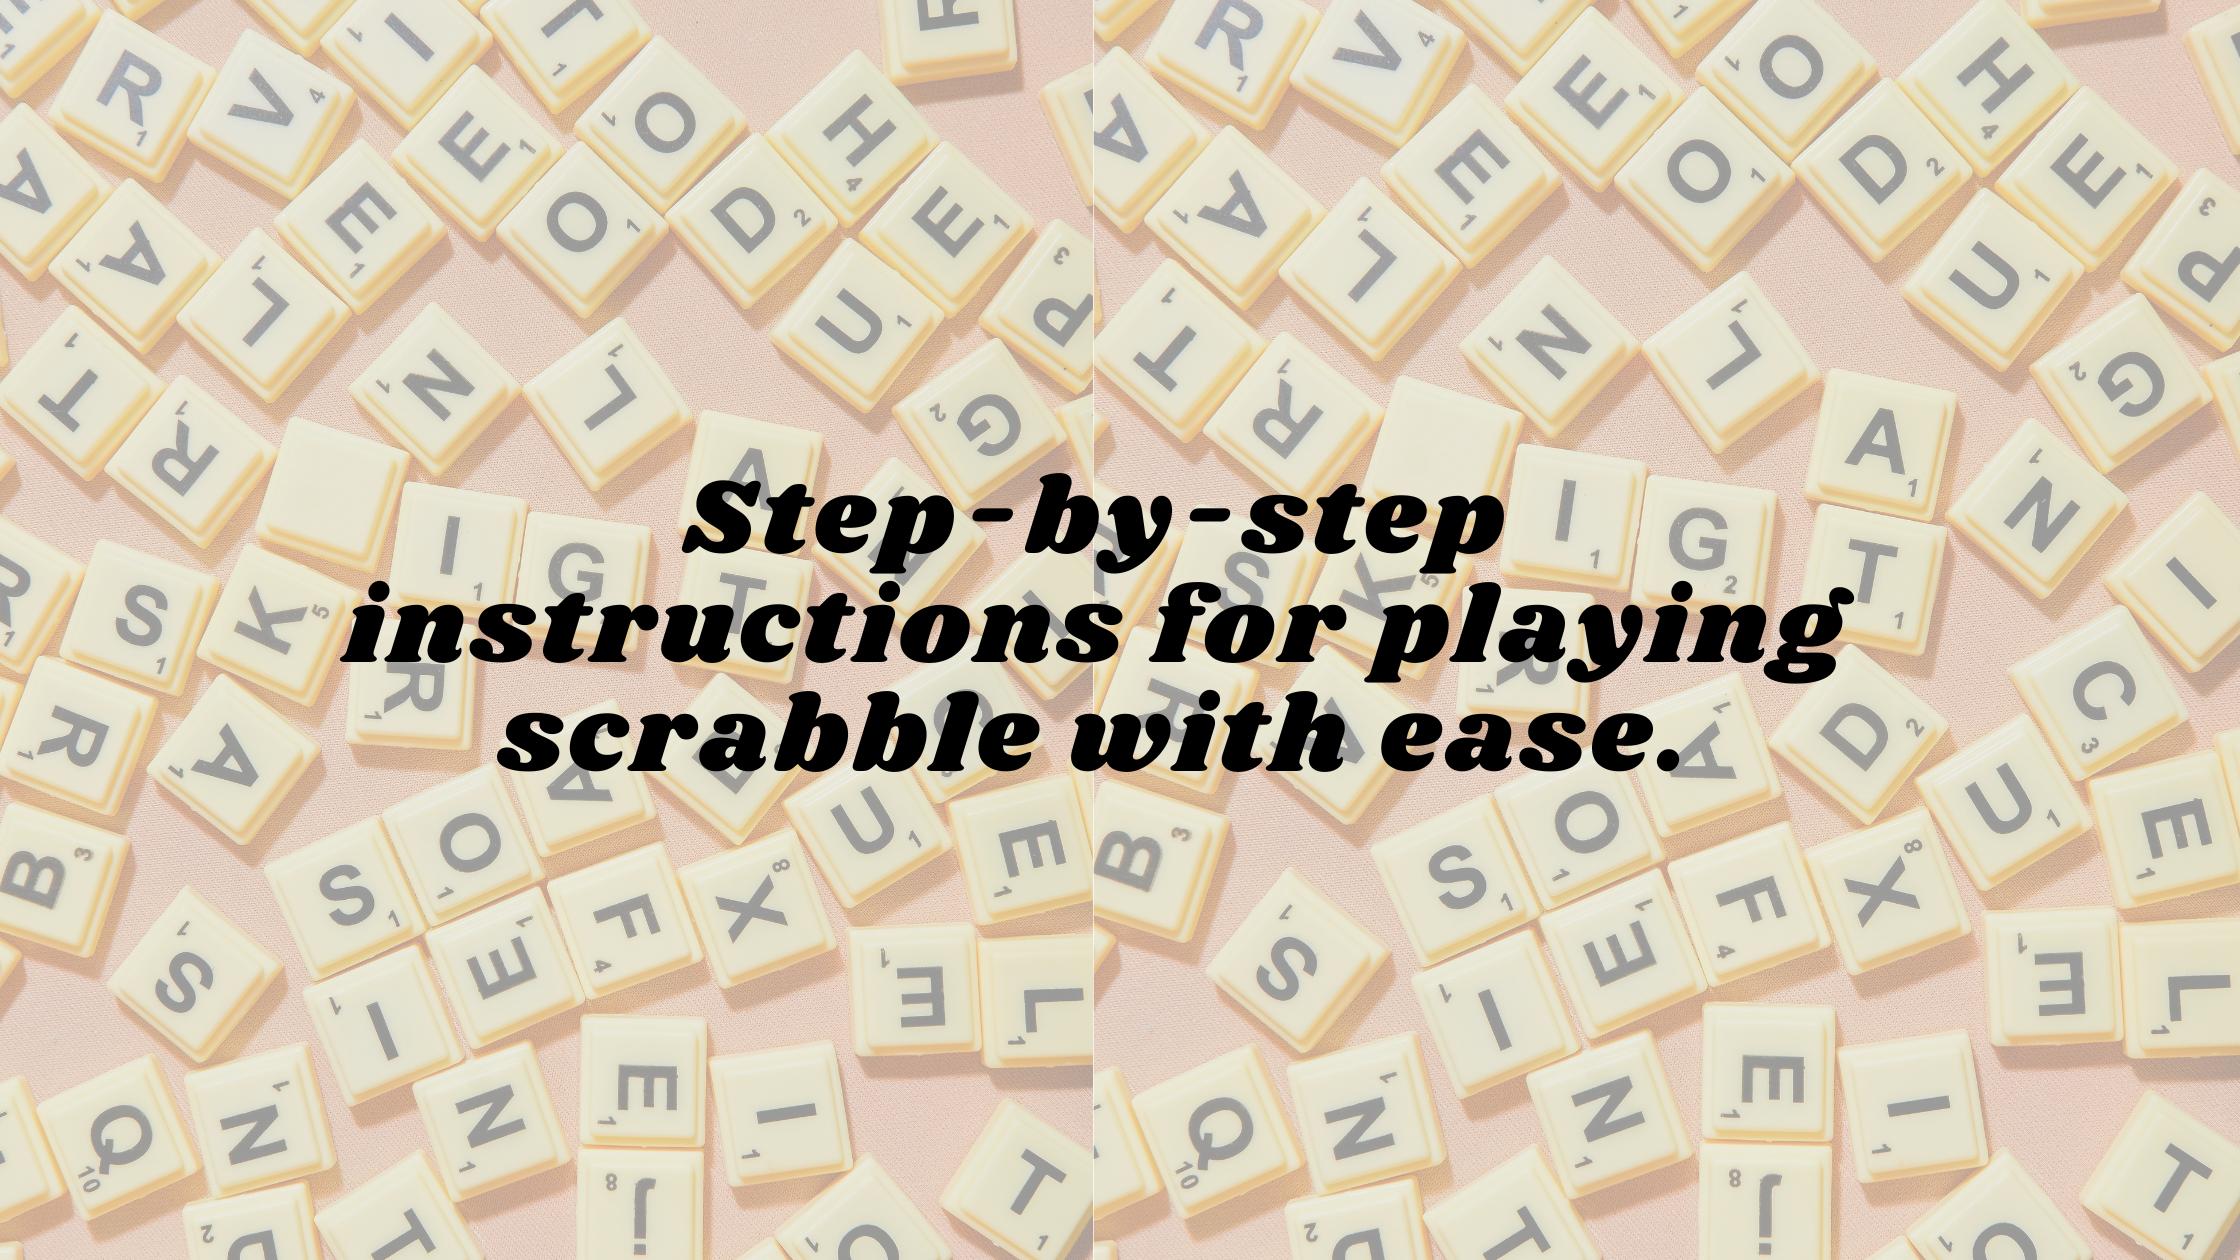 Step-by-step instructions for playing scrabble with ease.